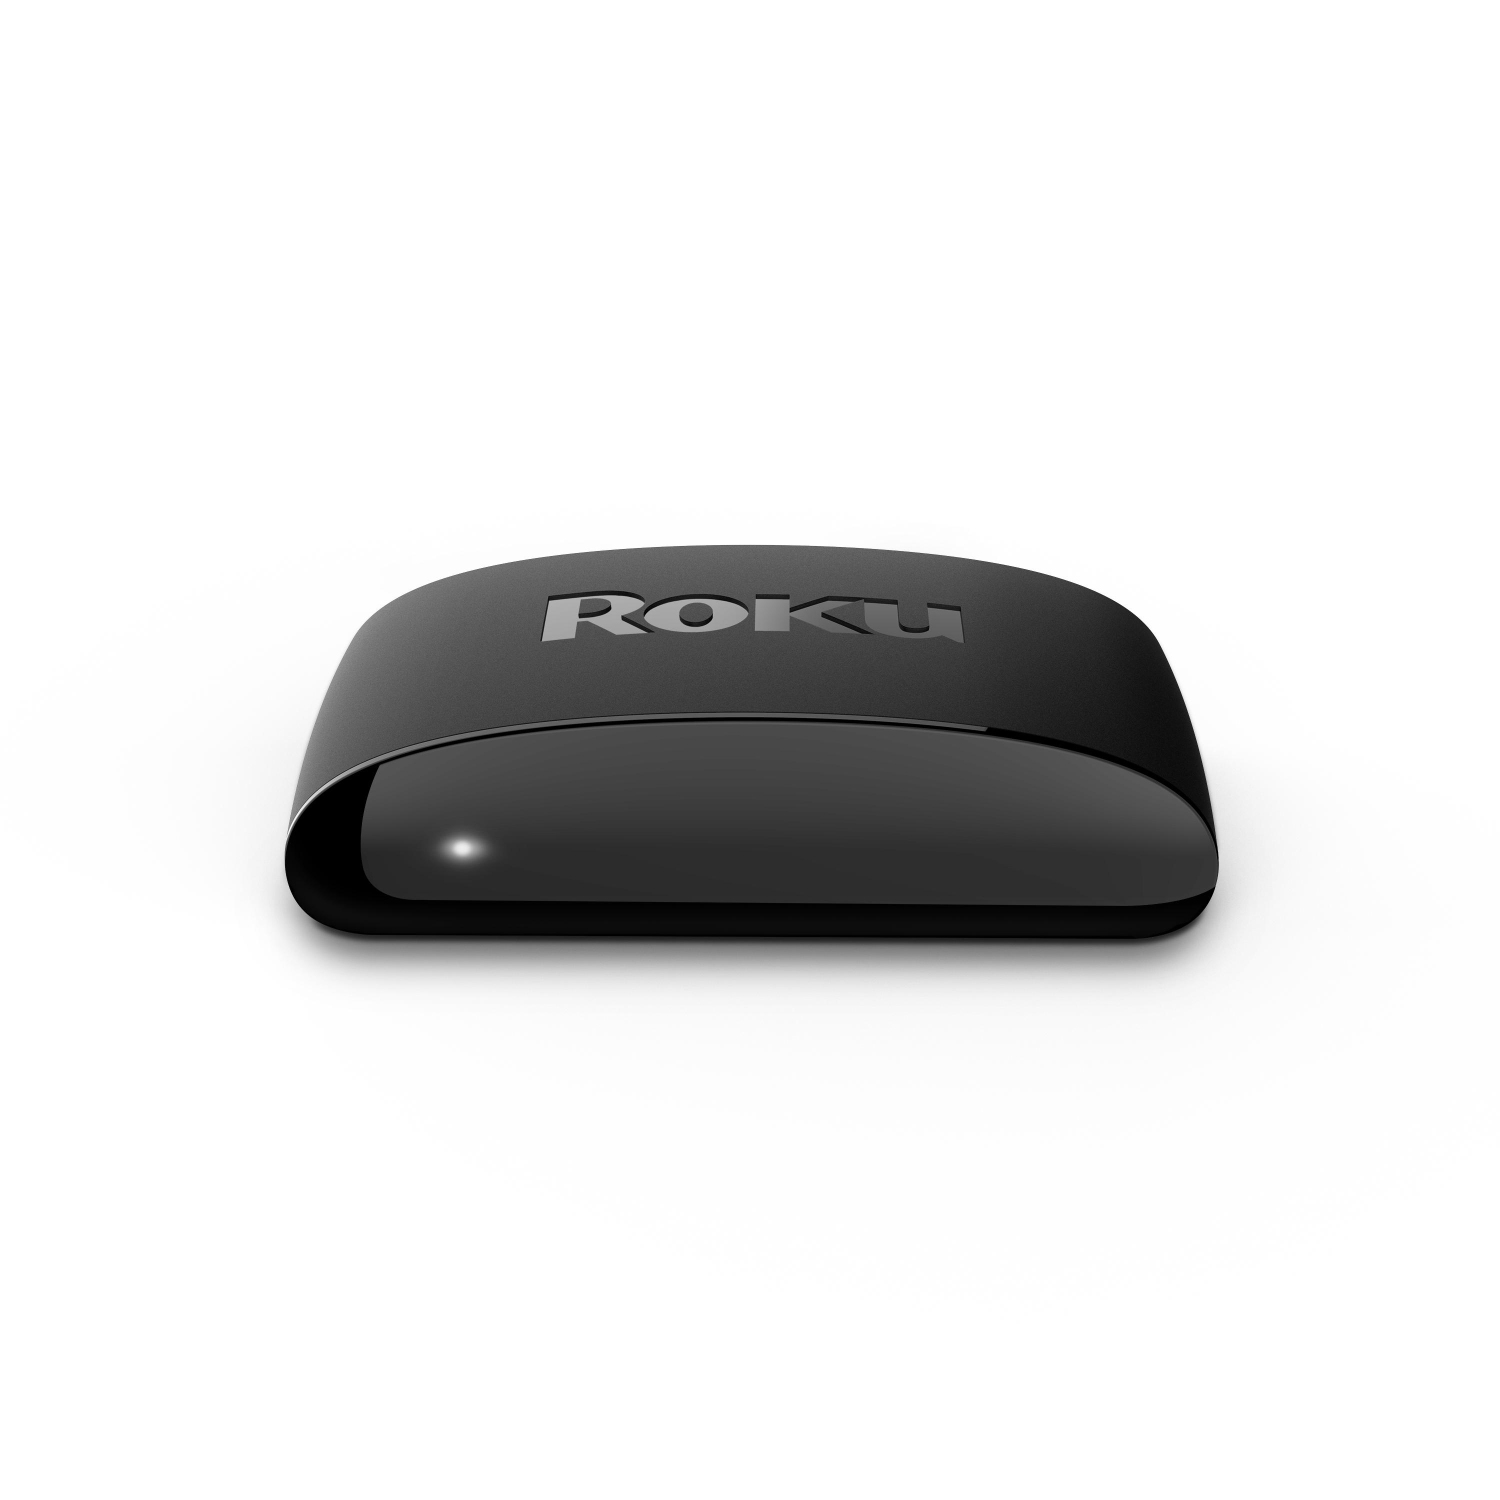 Refurbished (Excellent) - Roku Express HD Streaming Media Player - Certified Refurbished (Like New)